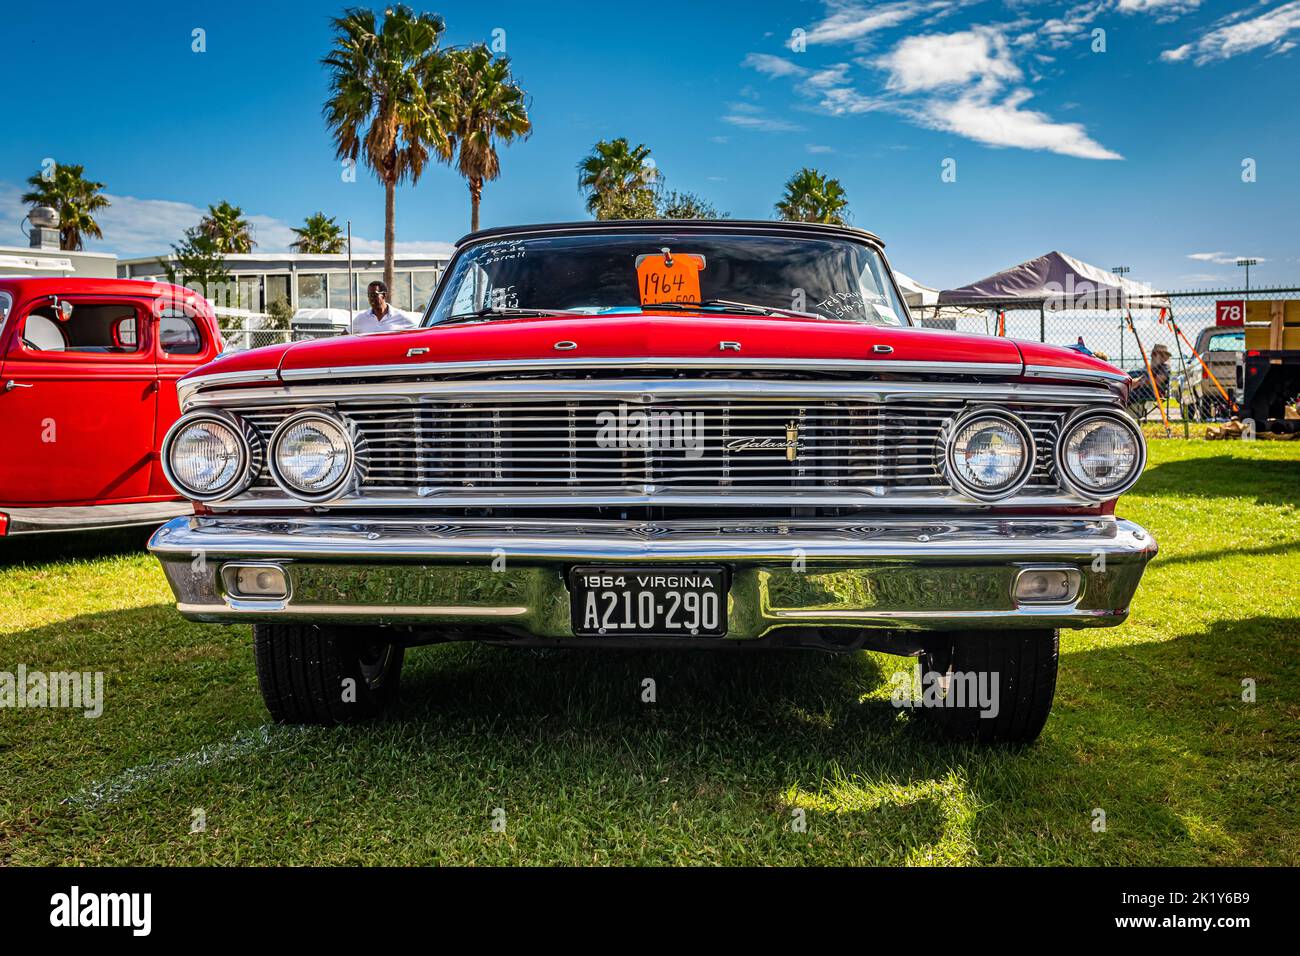 Daytona Beach, FL - November 28, 2020: Low perspective front view of a 1964 Ford Galaxie 500 Convertible at a local car show. Stock Photo